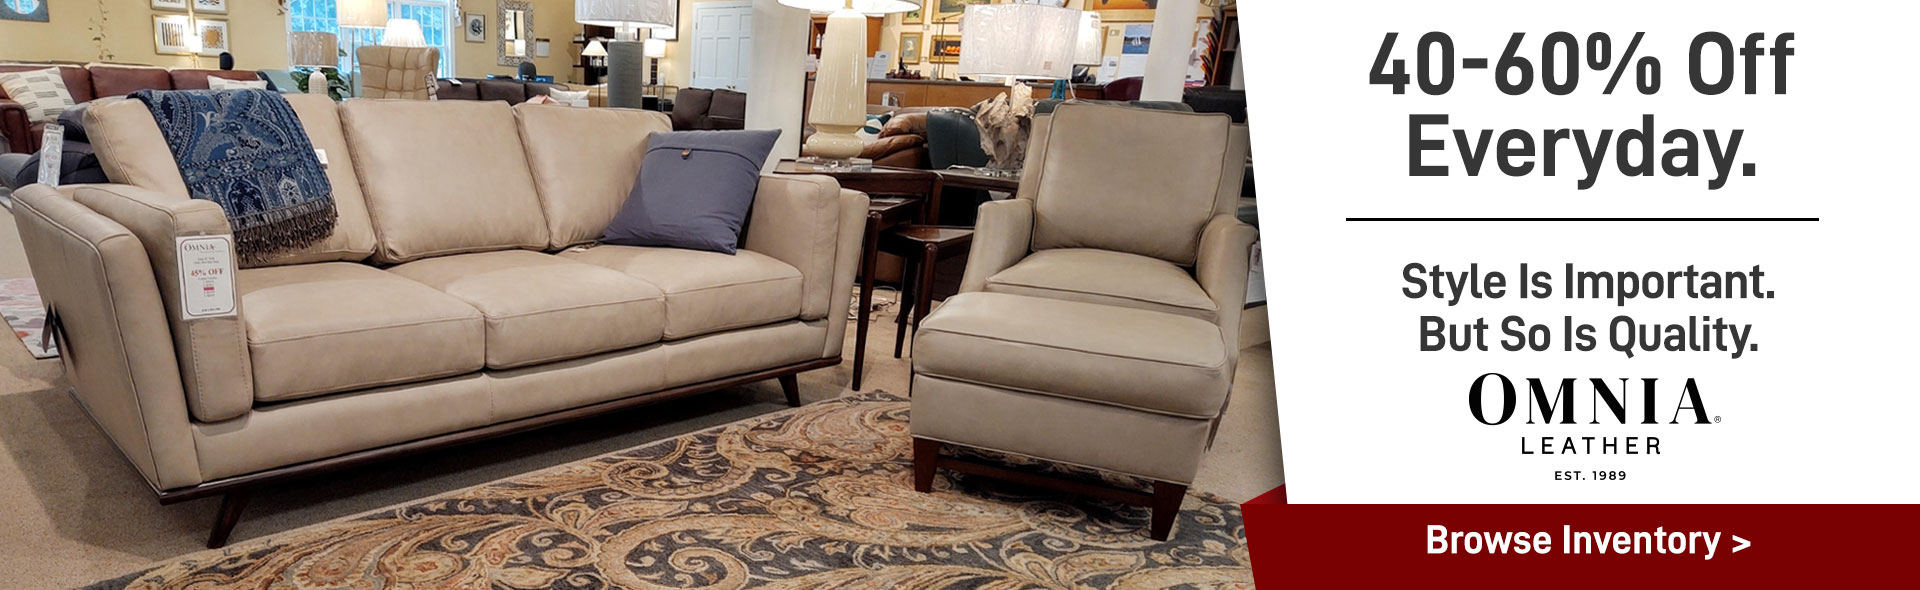 Omnia Leather Furniture At Affordable Prices - Currier's Leather Hampton NH